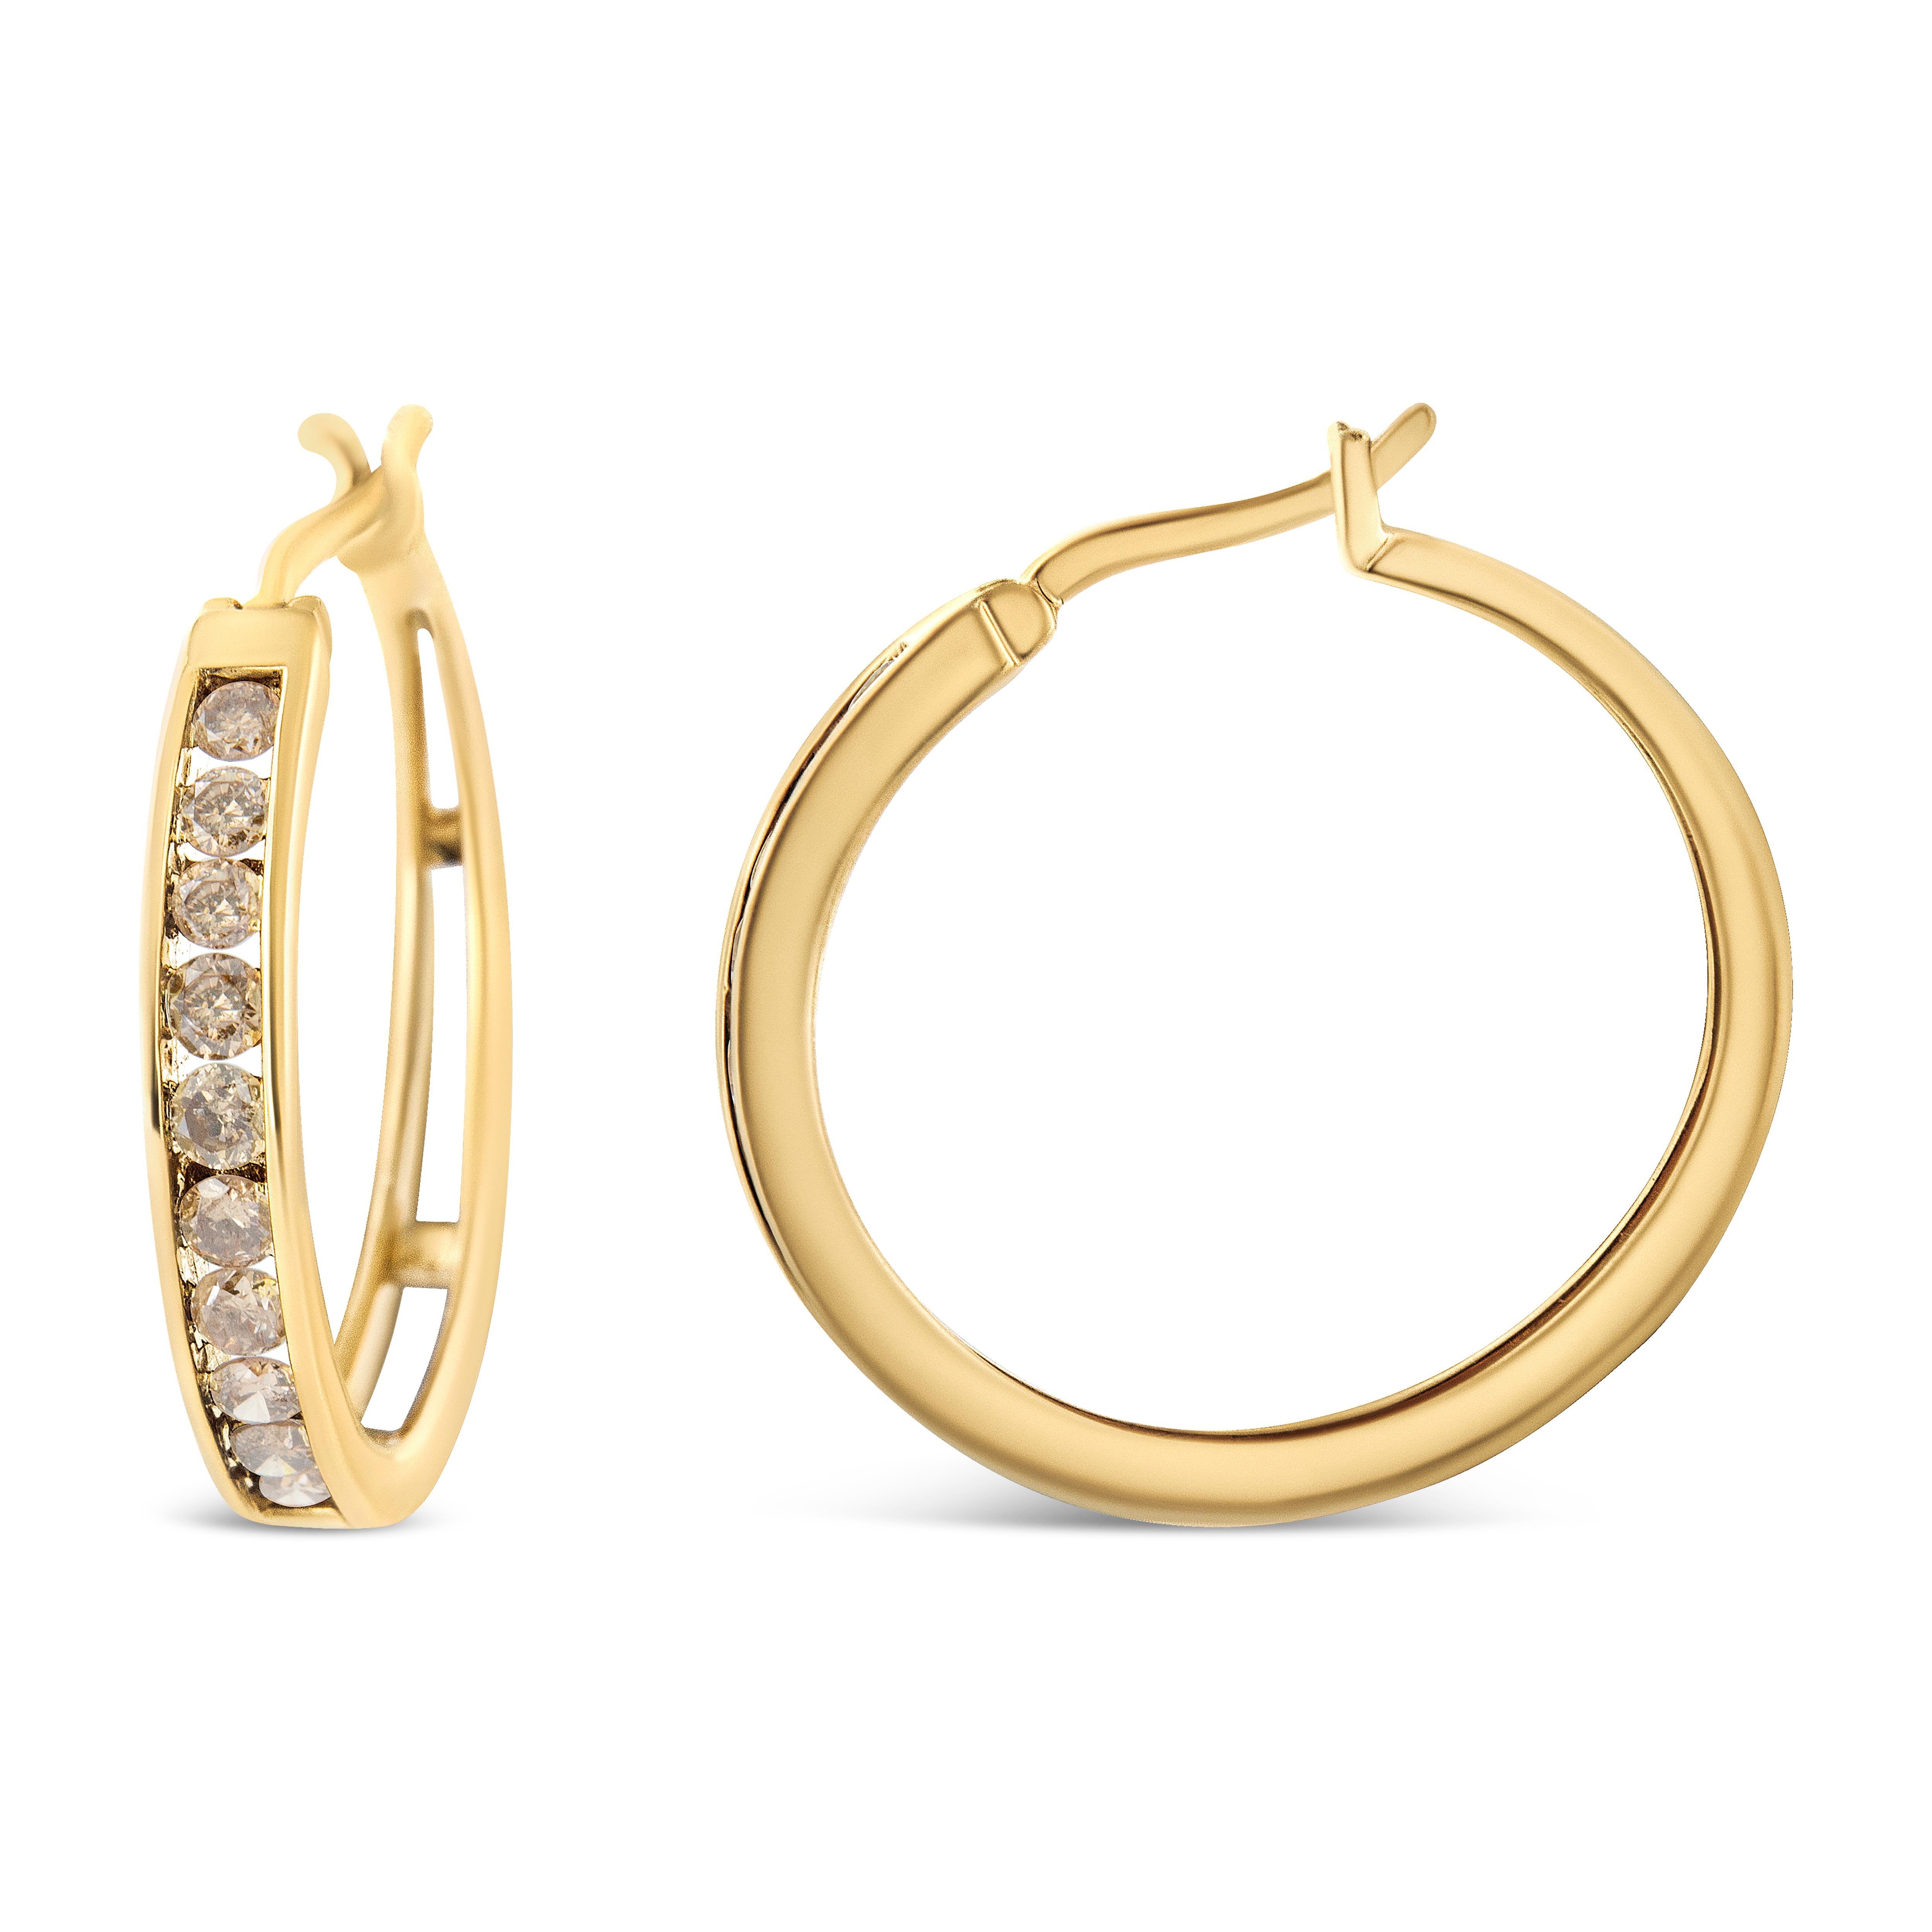 Modern 14K Yellow Gold Plated Sterling Silver 1.0 Carat Champagne Diamond Hoop Earrings For Sale